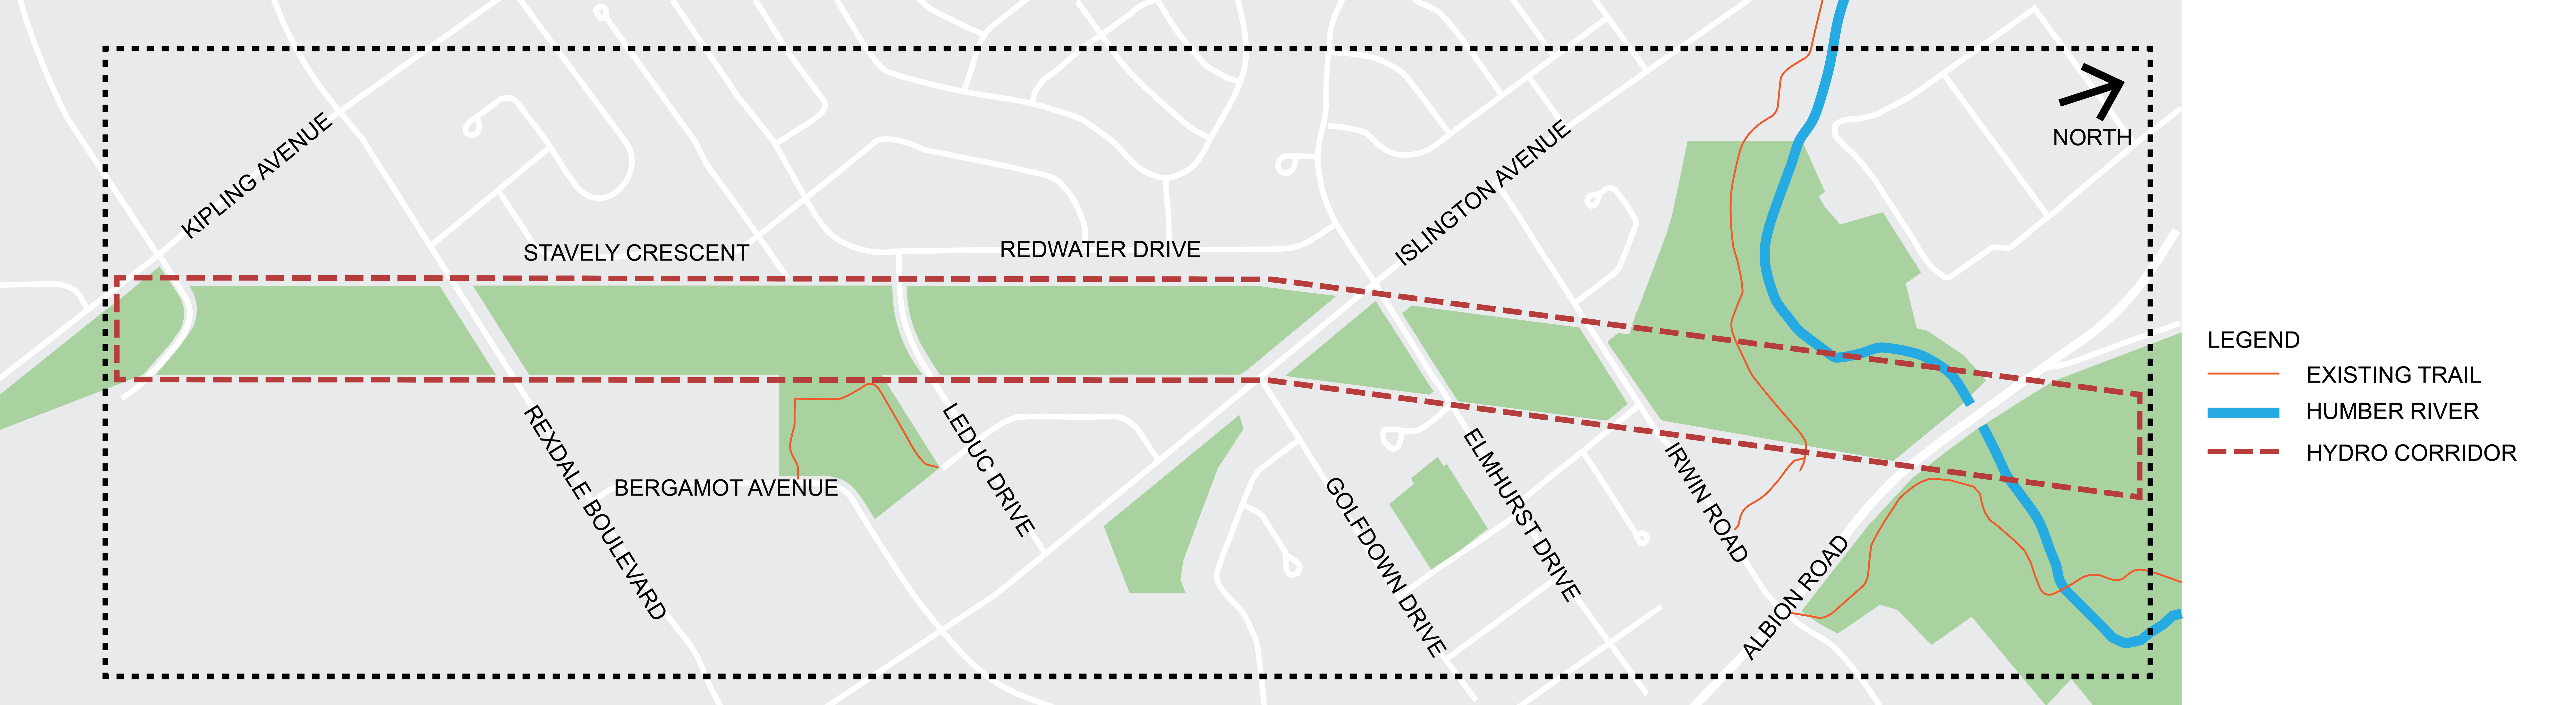 Map of the Study Area for the Proposed Etobicoke Hydro Corridor Multi-use Trail, showing the existing Humber River Trail, and major streets such as Kipling Avenue, Rexdale Boulevard, and Islington Avenue